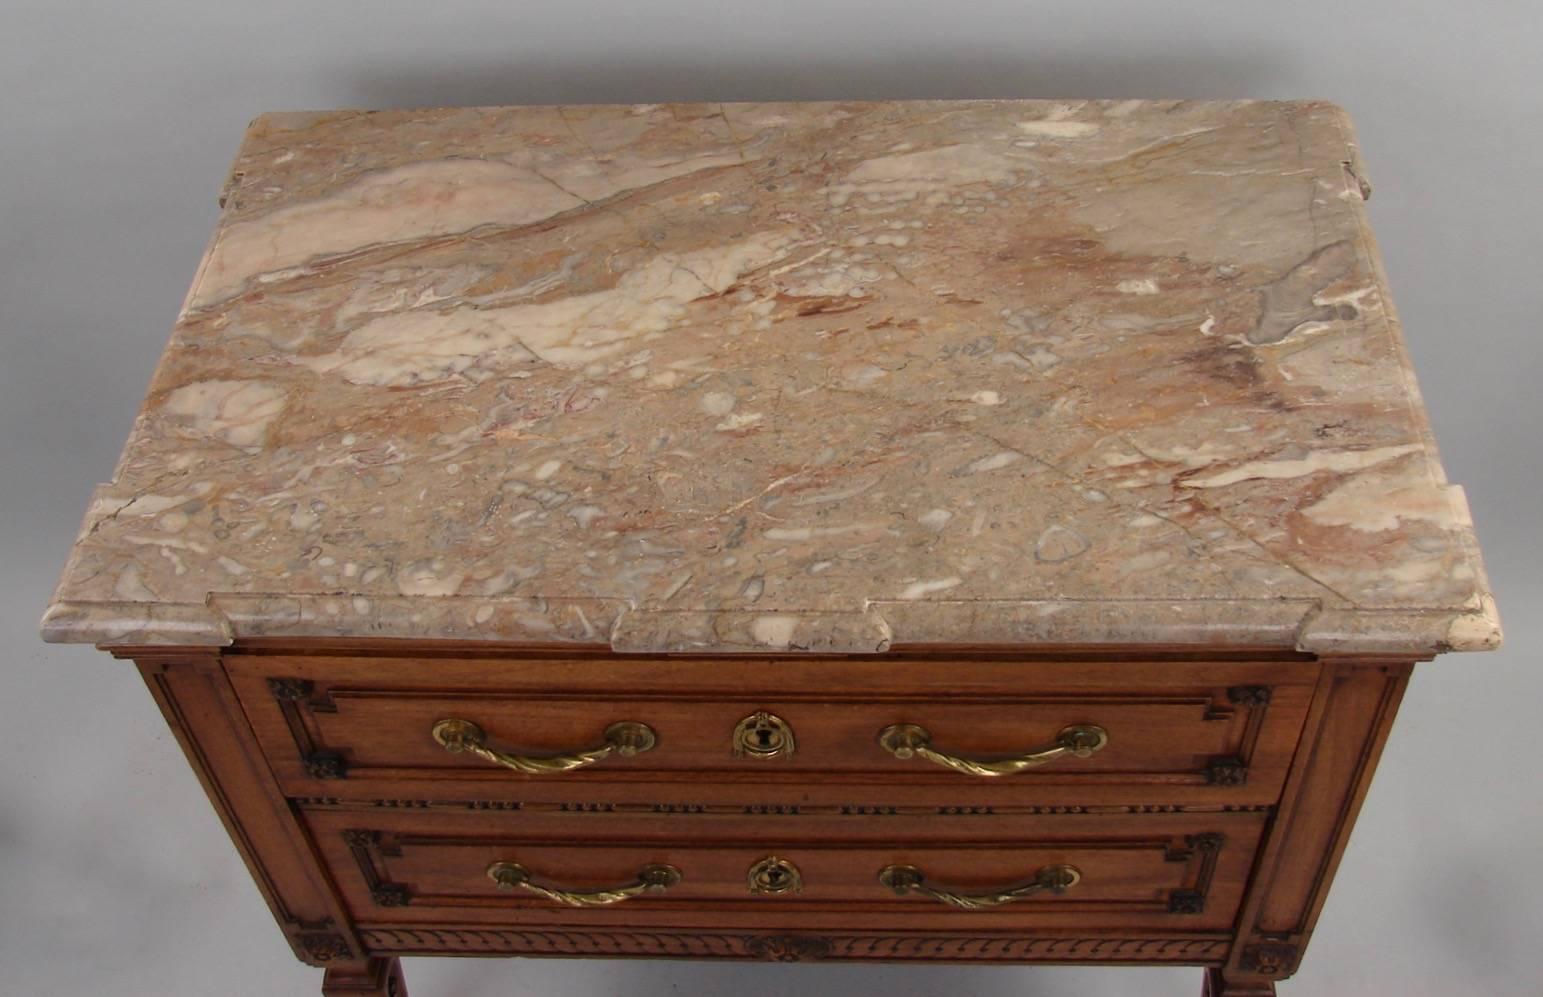 A good continental neoclassical walnut two-drawer commode, the variegated cream colored marble-top above a molded edge over two inset paneled drawers decorated with bosses, the sides similarly treated, all supported on carved tapering legs. Stamped